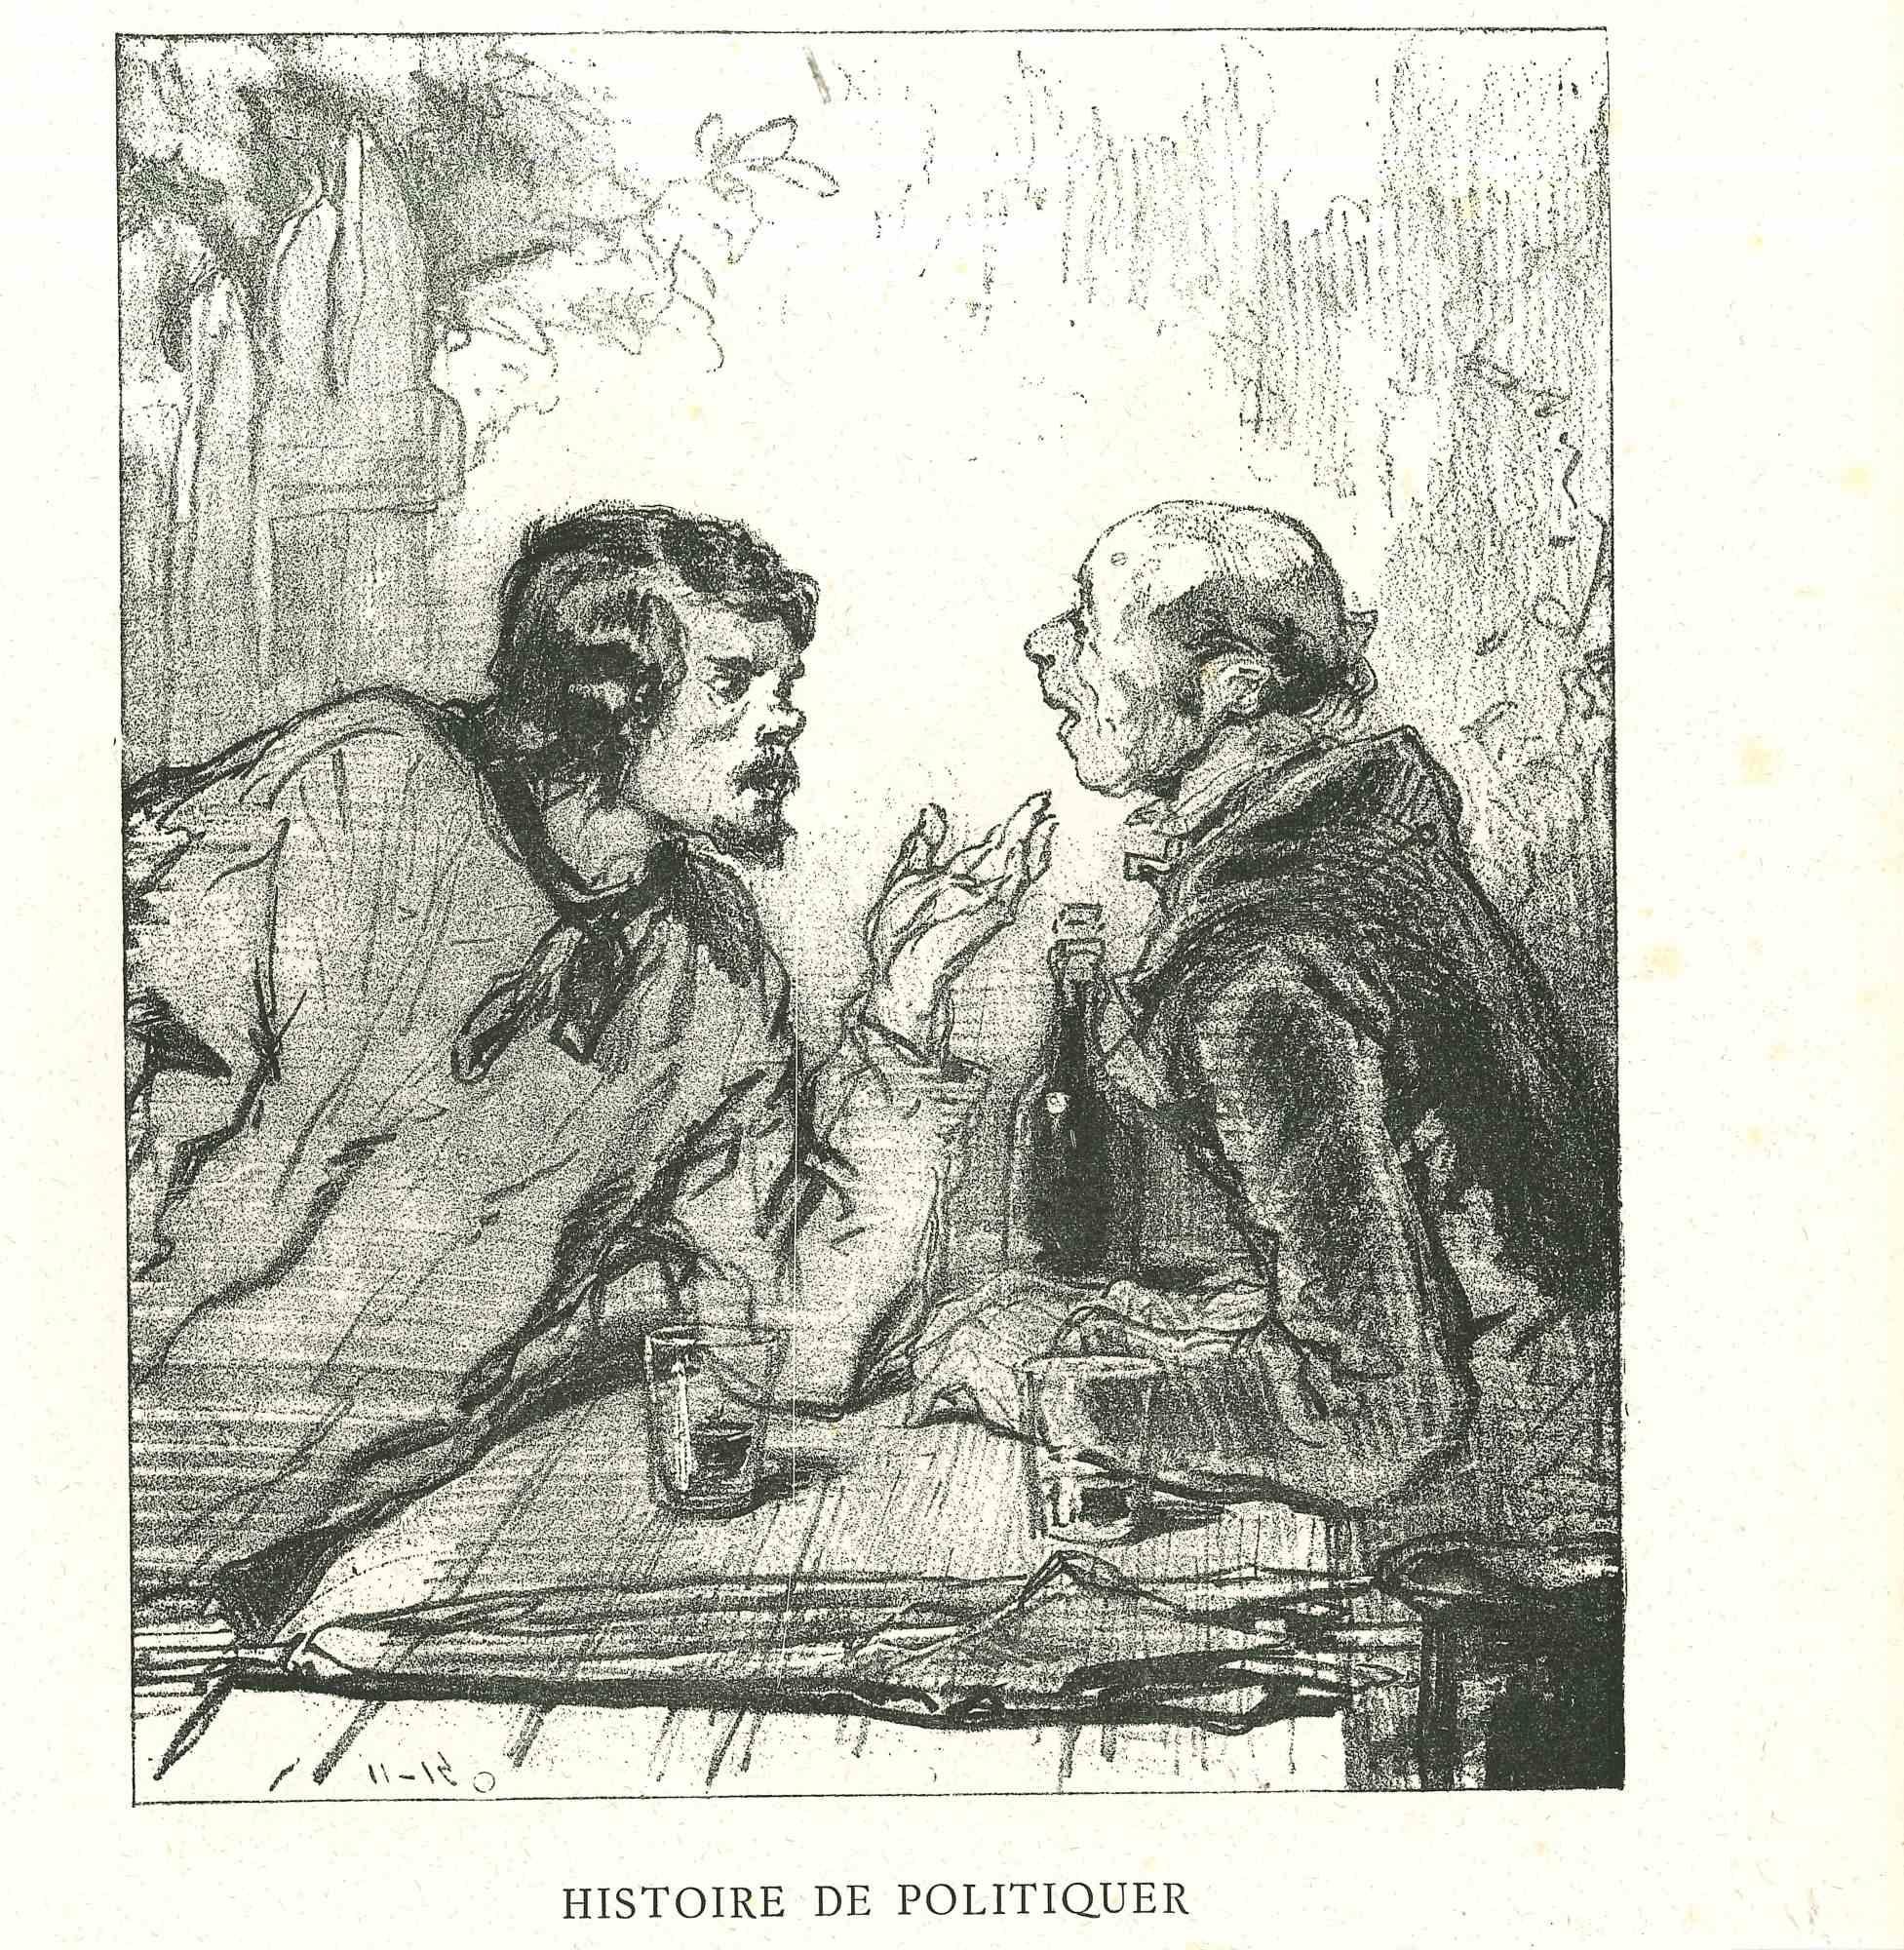 The Conversation is an original lithograph artwork on ivory-colored paper, realized by the French draftsman Paul Gavarni (after) (alias Guillaume Sulpice Chevalier Gavarni, 1804-1866) in Paris, 1881, in the collection of Illustrations for "La